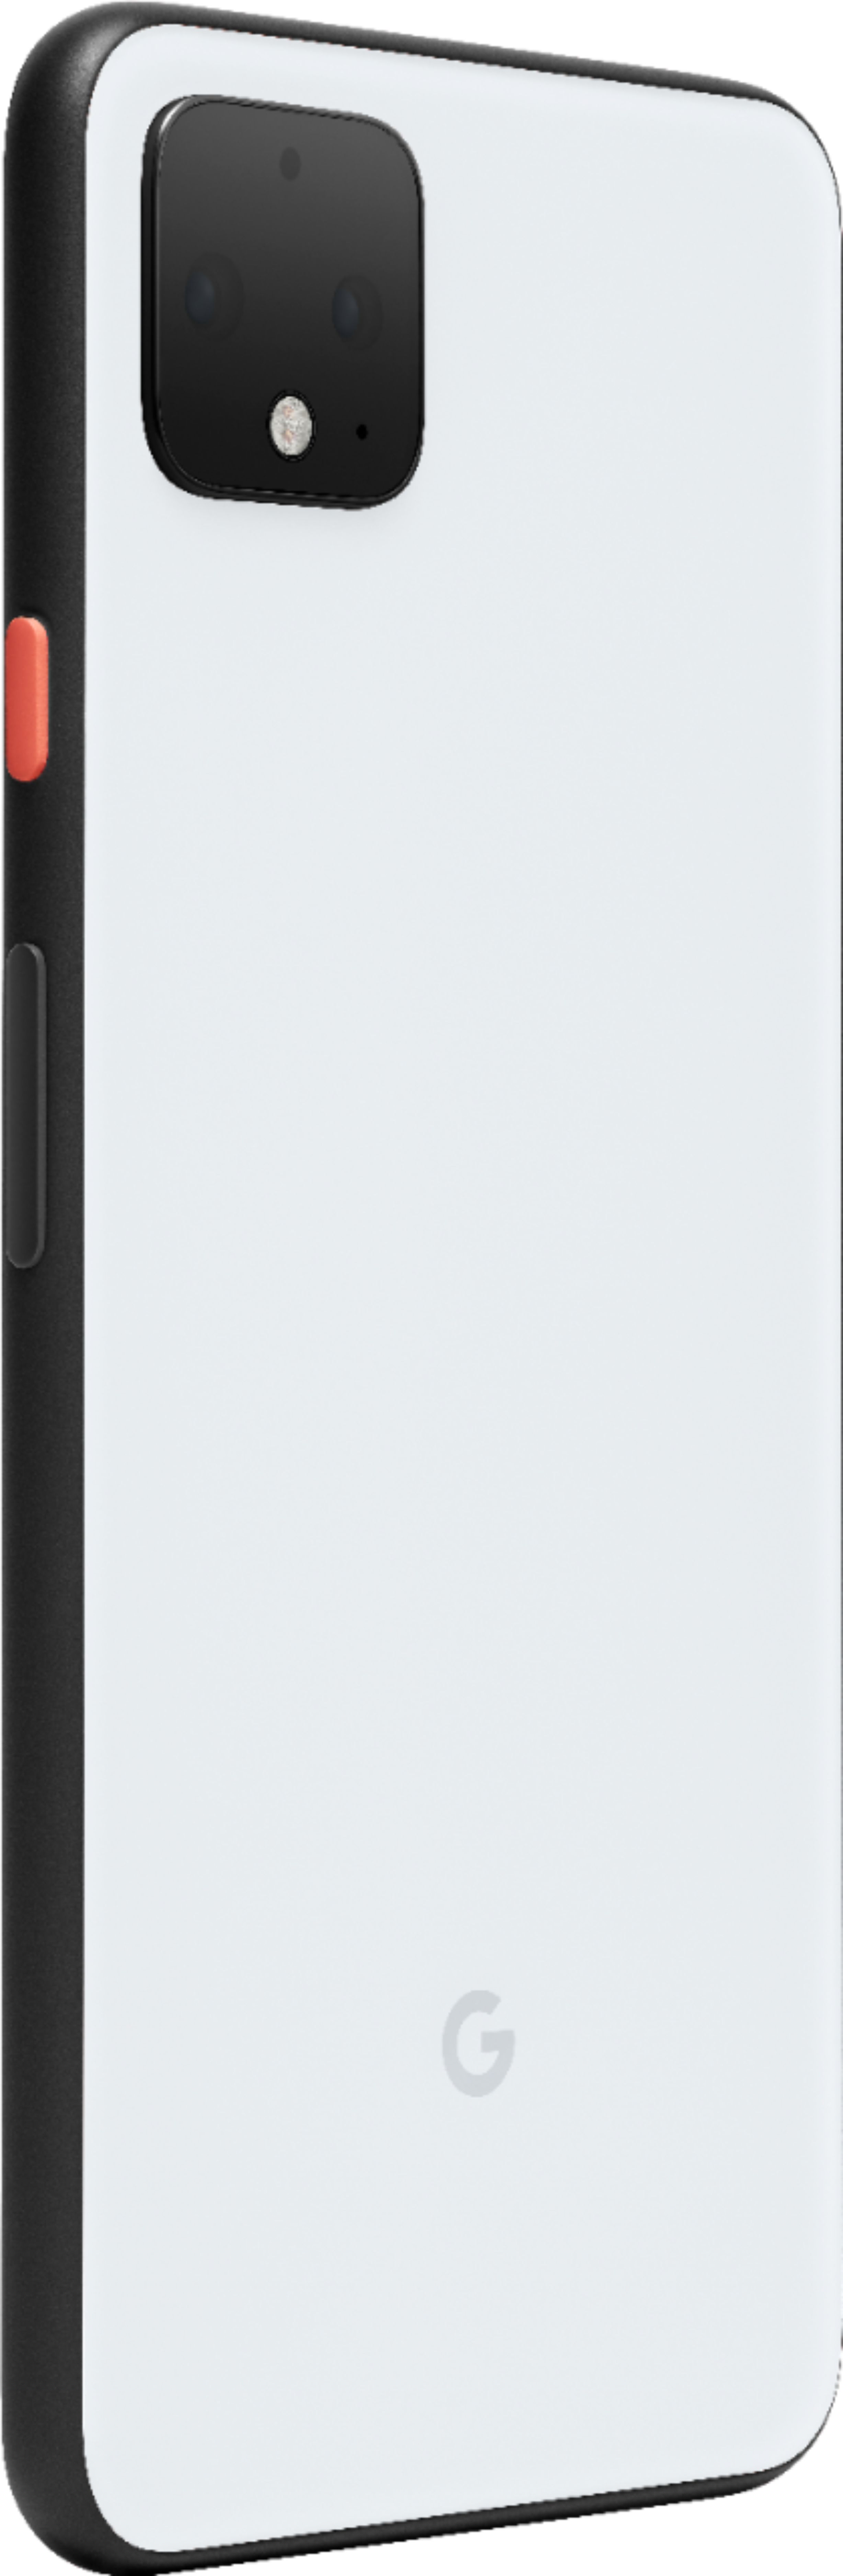 Best Buy: Google Pixel 4 XL 64GB Clearly White (AT&T) G020J